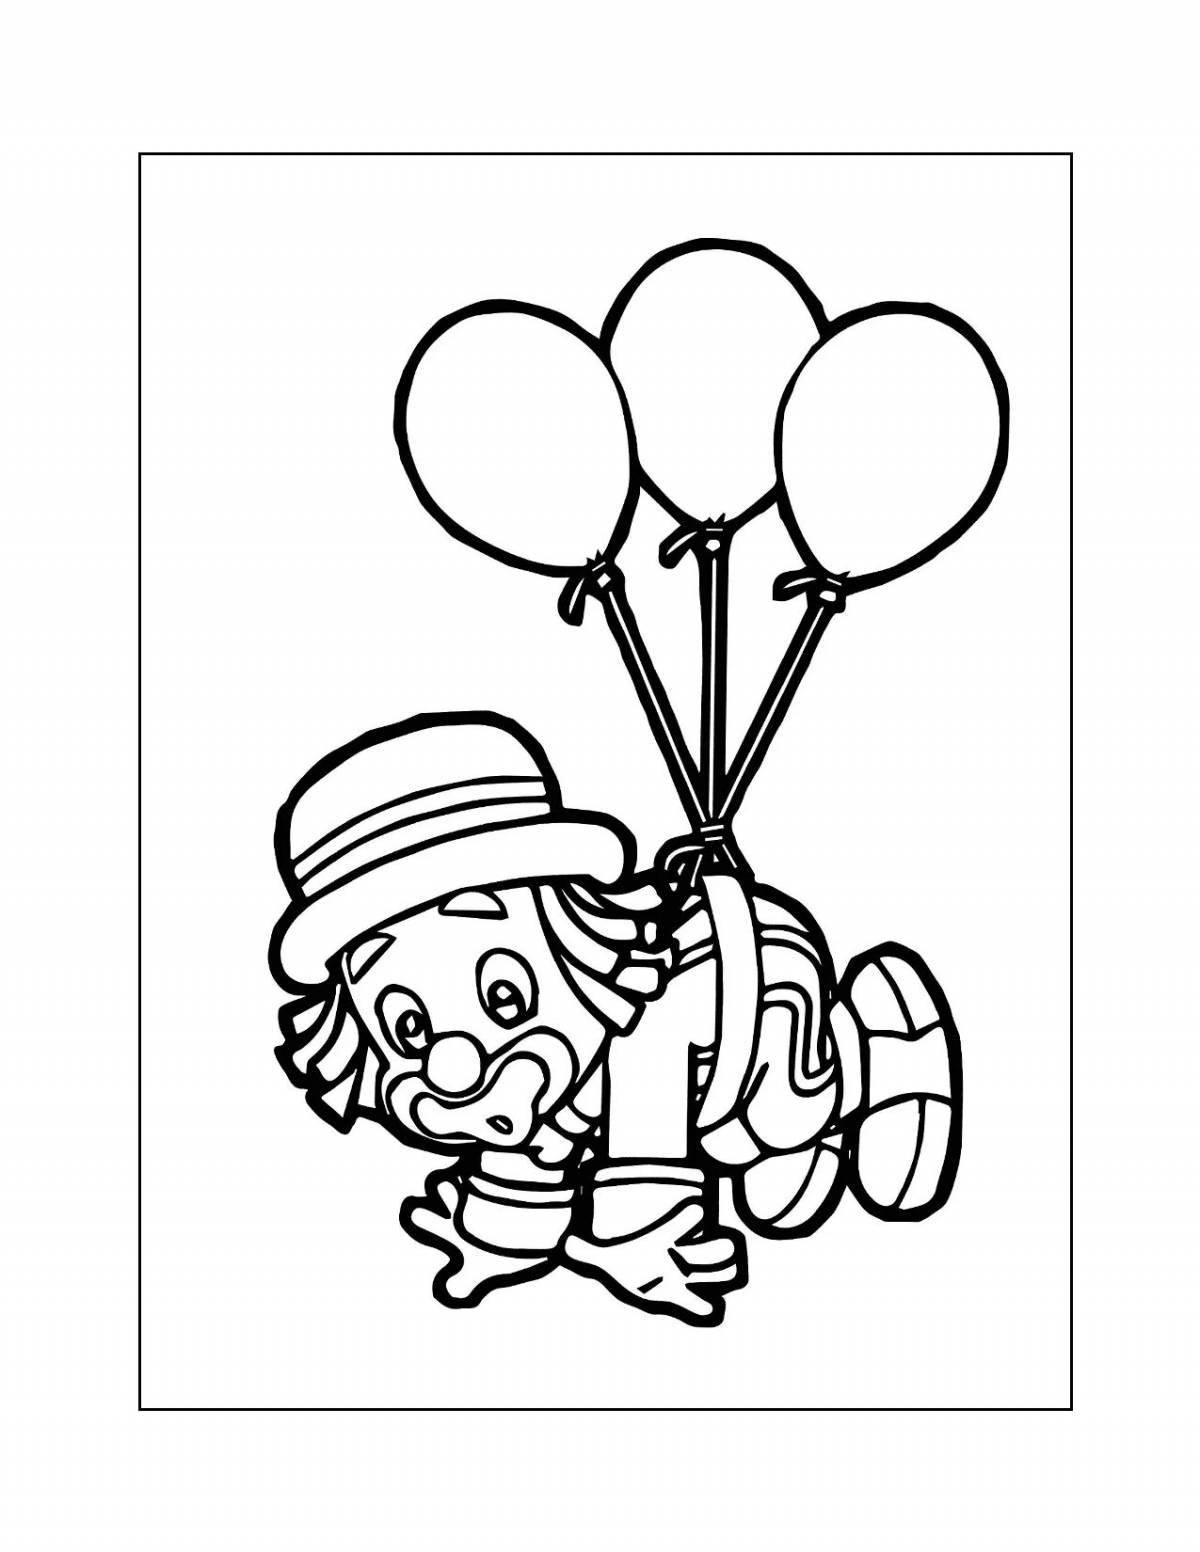 Coloring book charming clown for children 6-7 years old